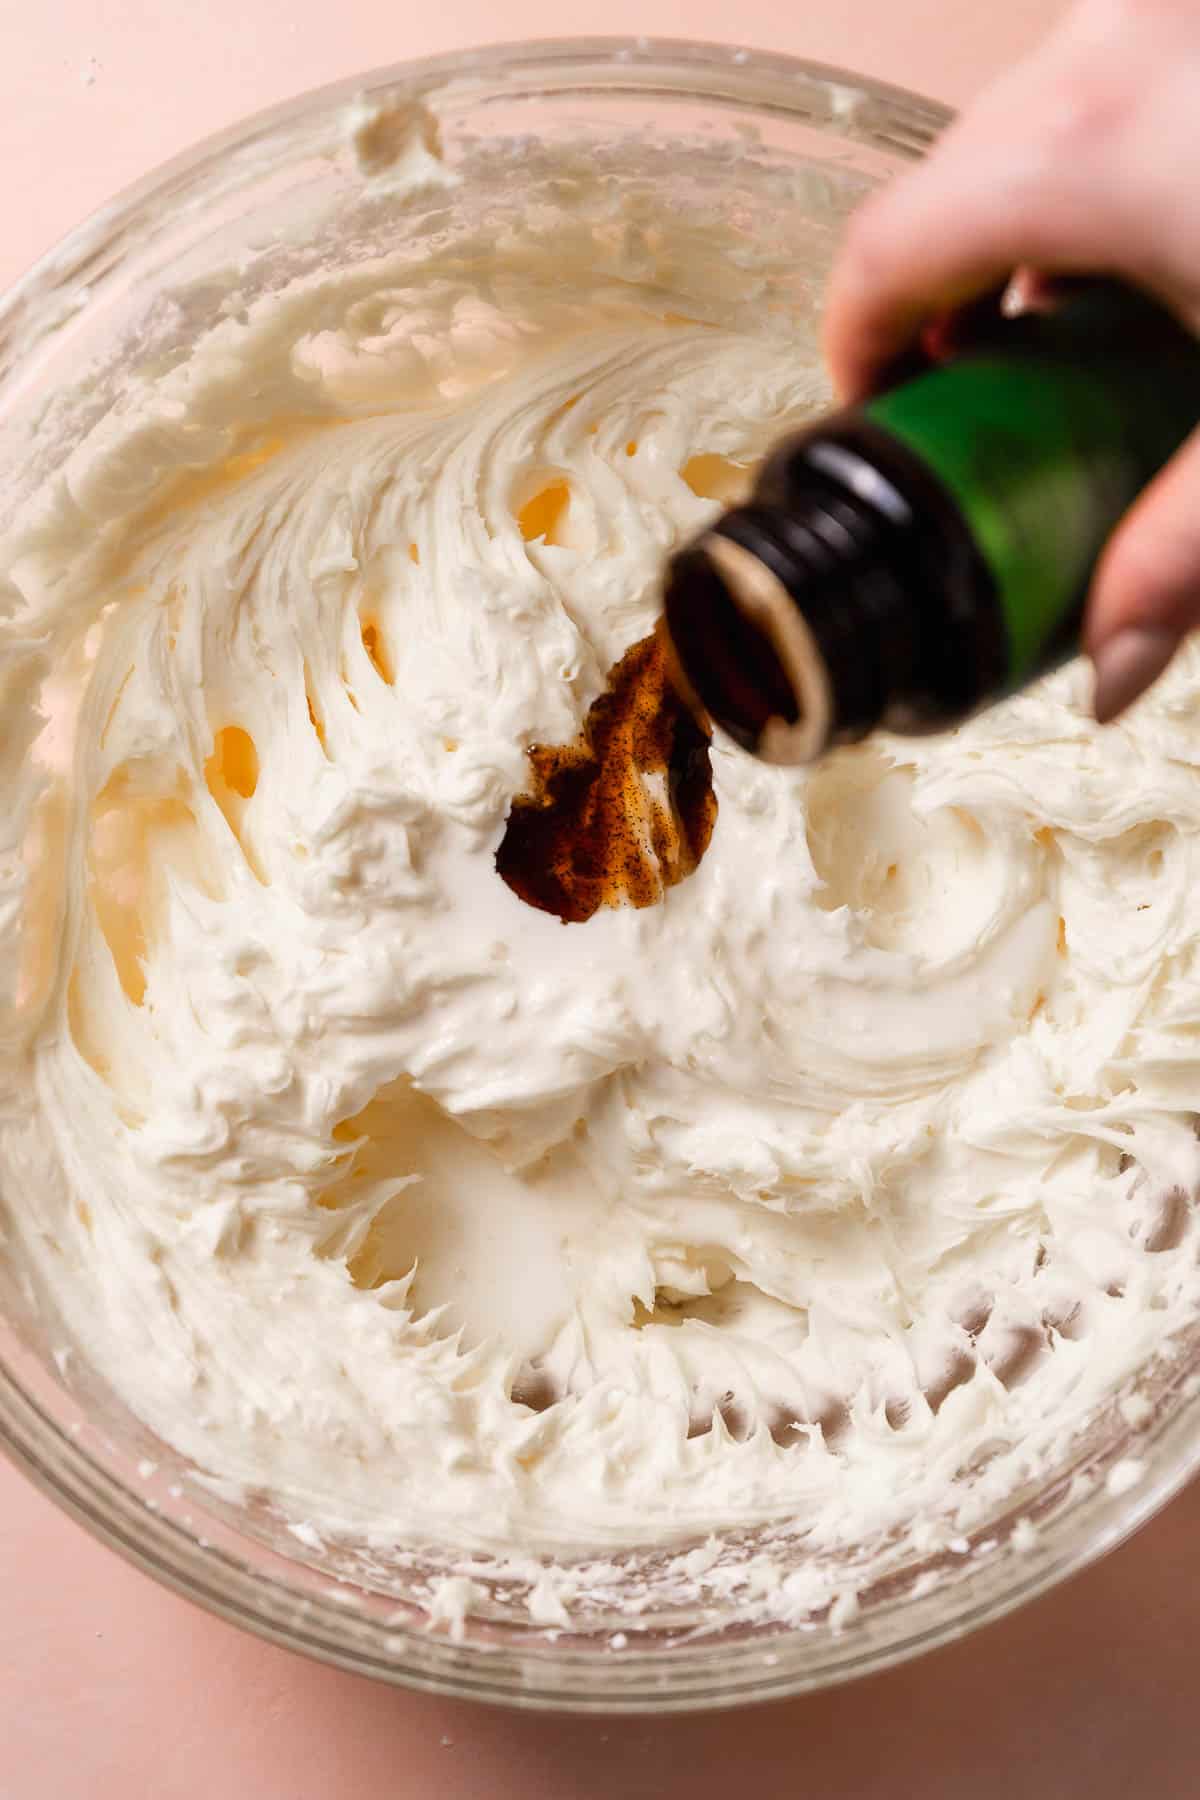 Vanilla bean paste being added to the cream cheese frosting.